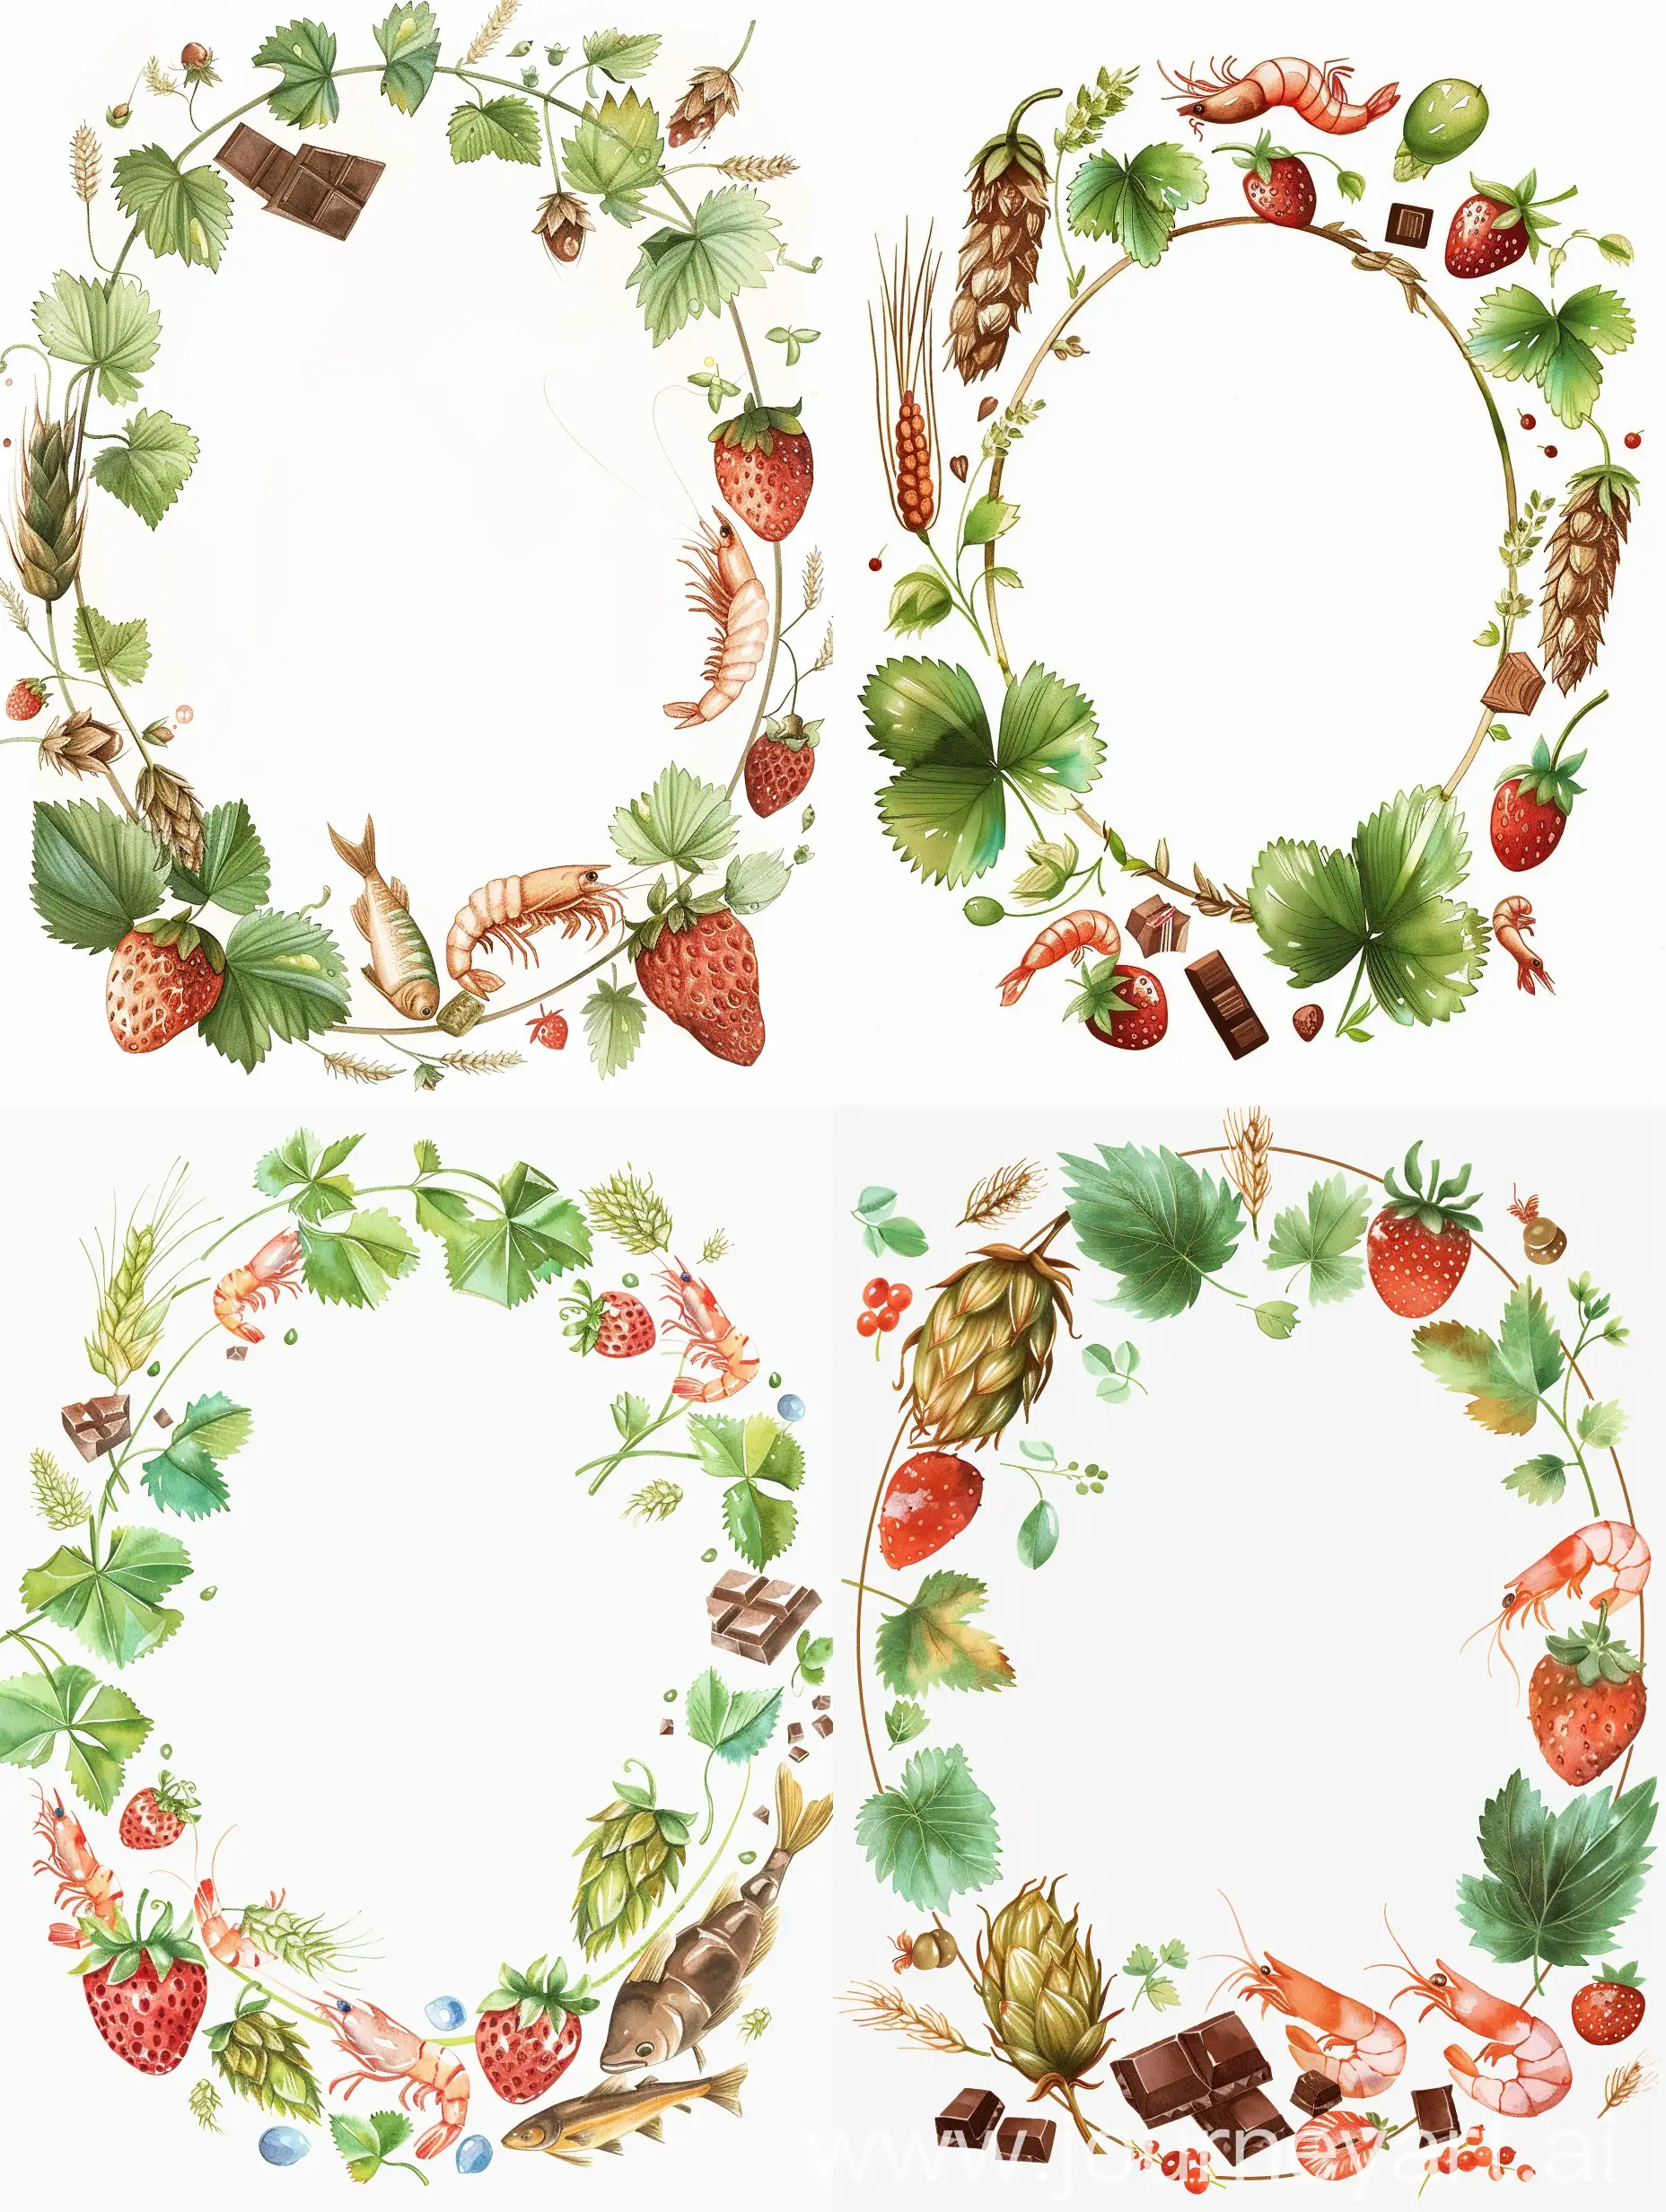 Oval frame with an ornament of small hop leaves and hop cones, barley spikelets, small fish, shrimp, strawberries, chocolate, on a white background, flat illustration, watercolor, Victor Ngai style